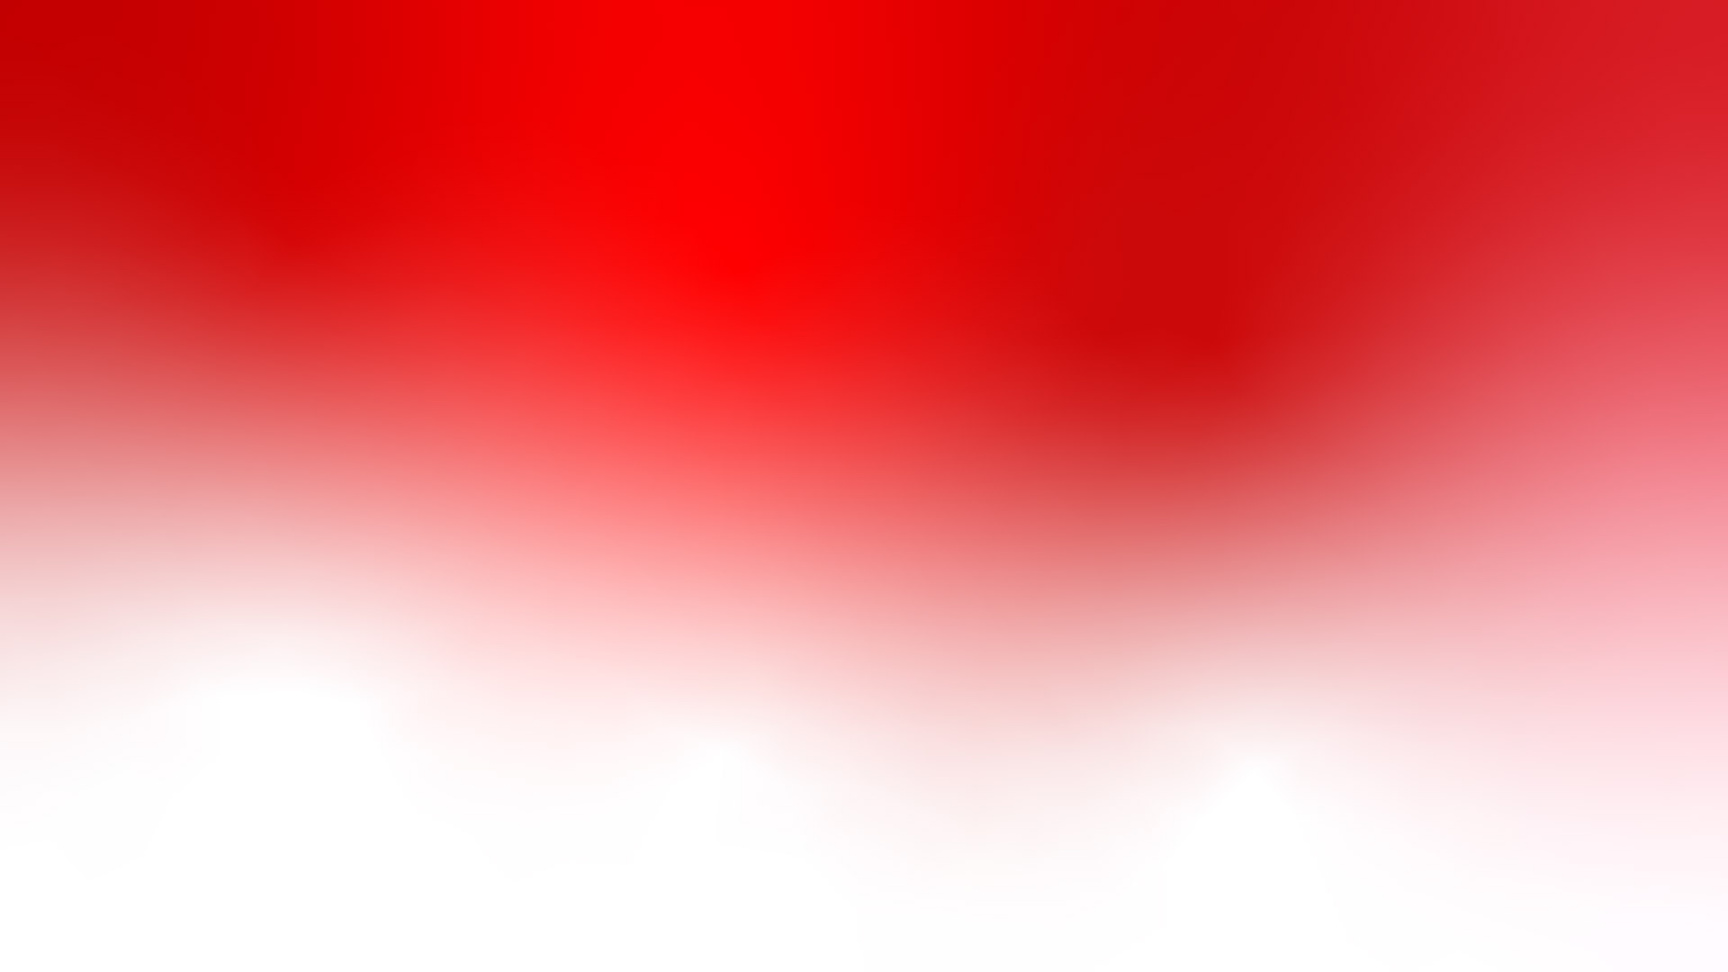 Red and white gradient background